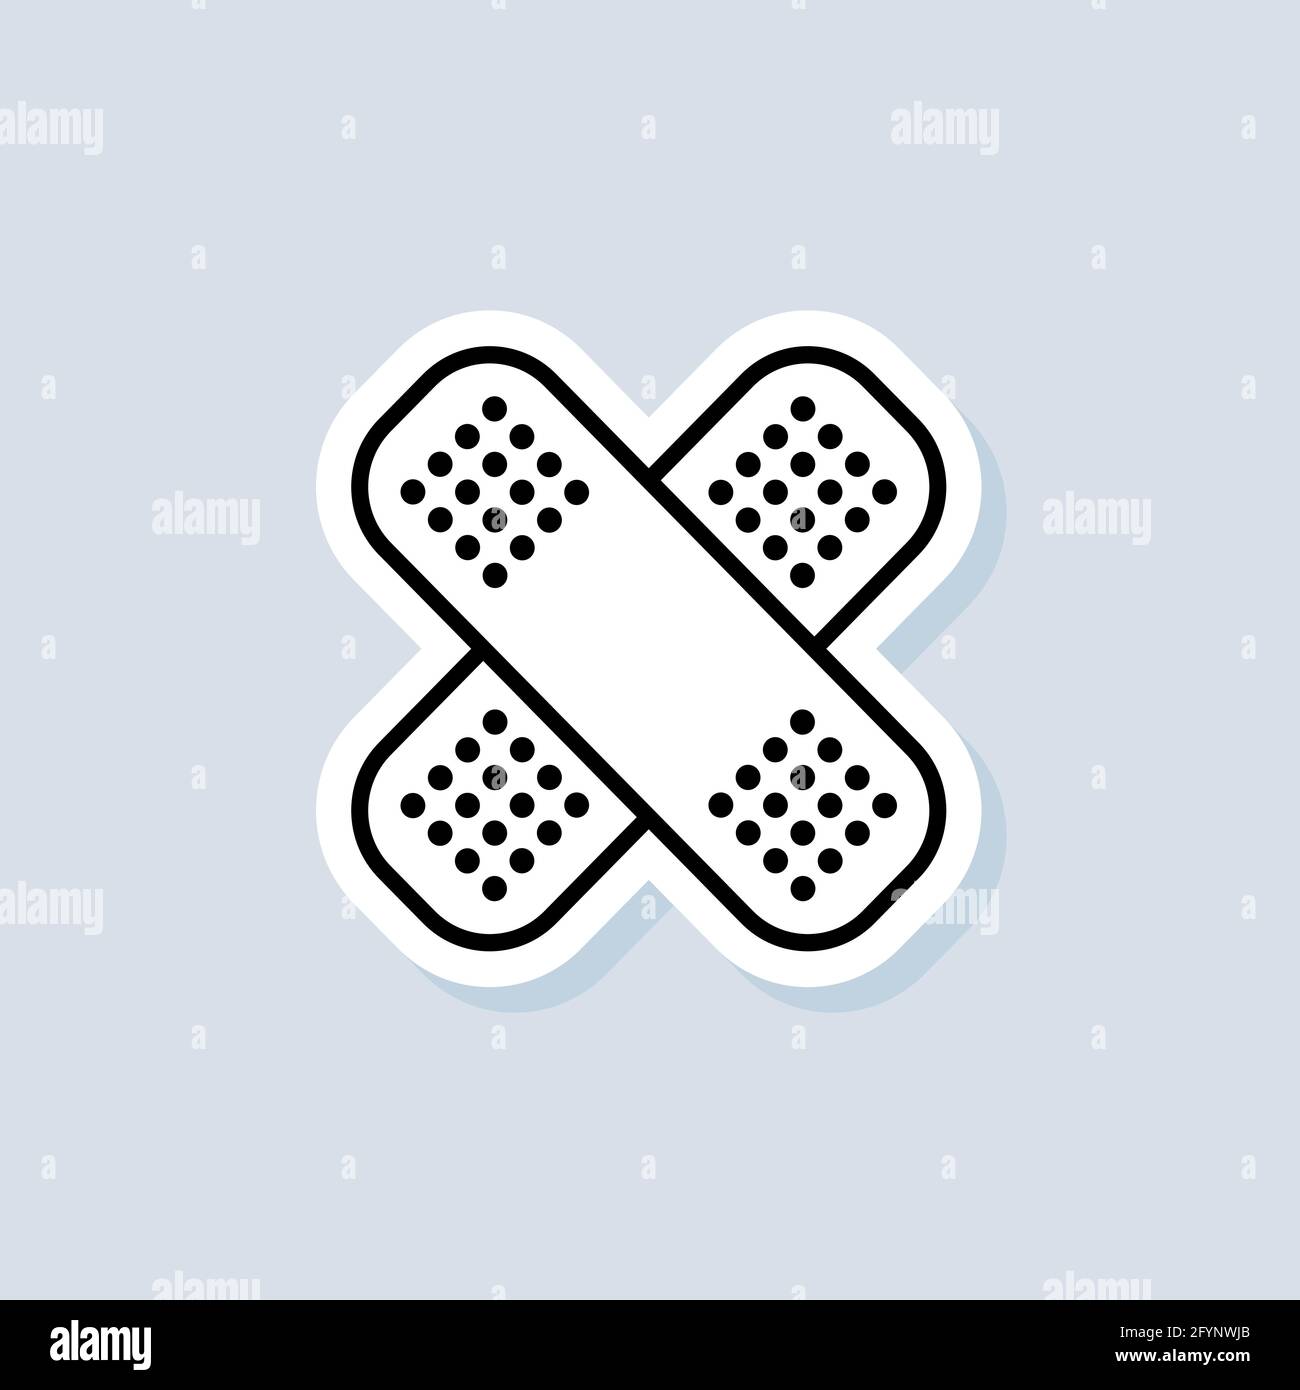 Adhesive plaster sticker. Pharmacy plasters. Emergency. Hospital. Healthcare concept. Vector on isolated background. EPS 10. Stock Vector